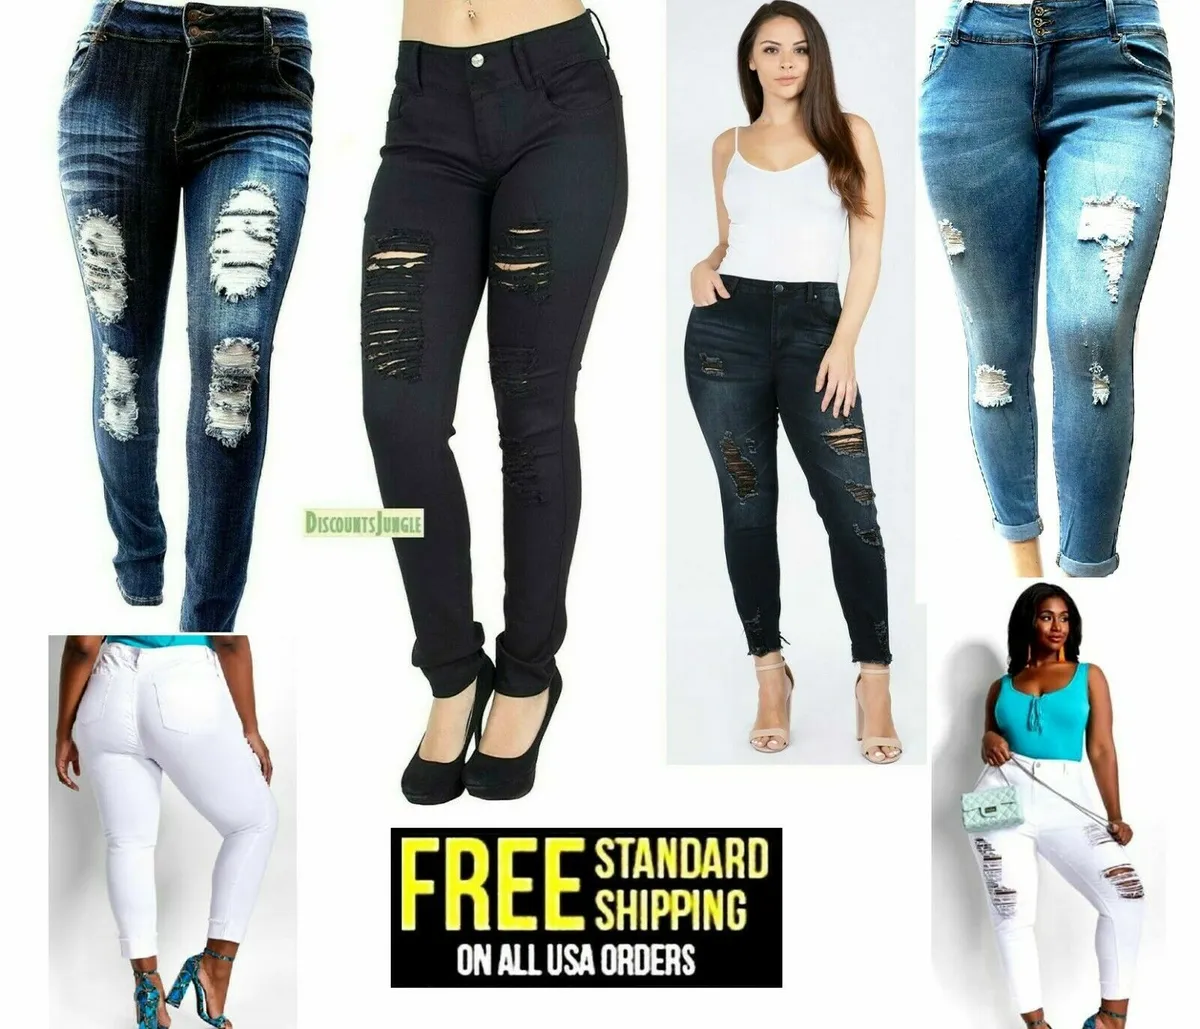 WOMENS PLUS SIZE JEANS Stretch Distressed Ripped SKINNY DENIM PANTS 14 to 34